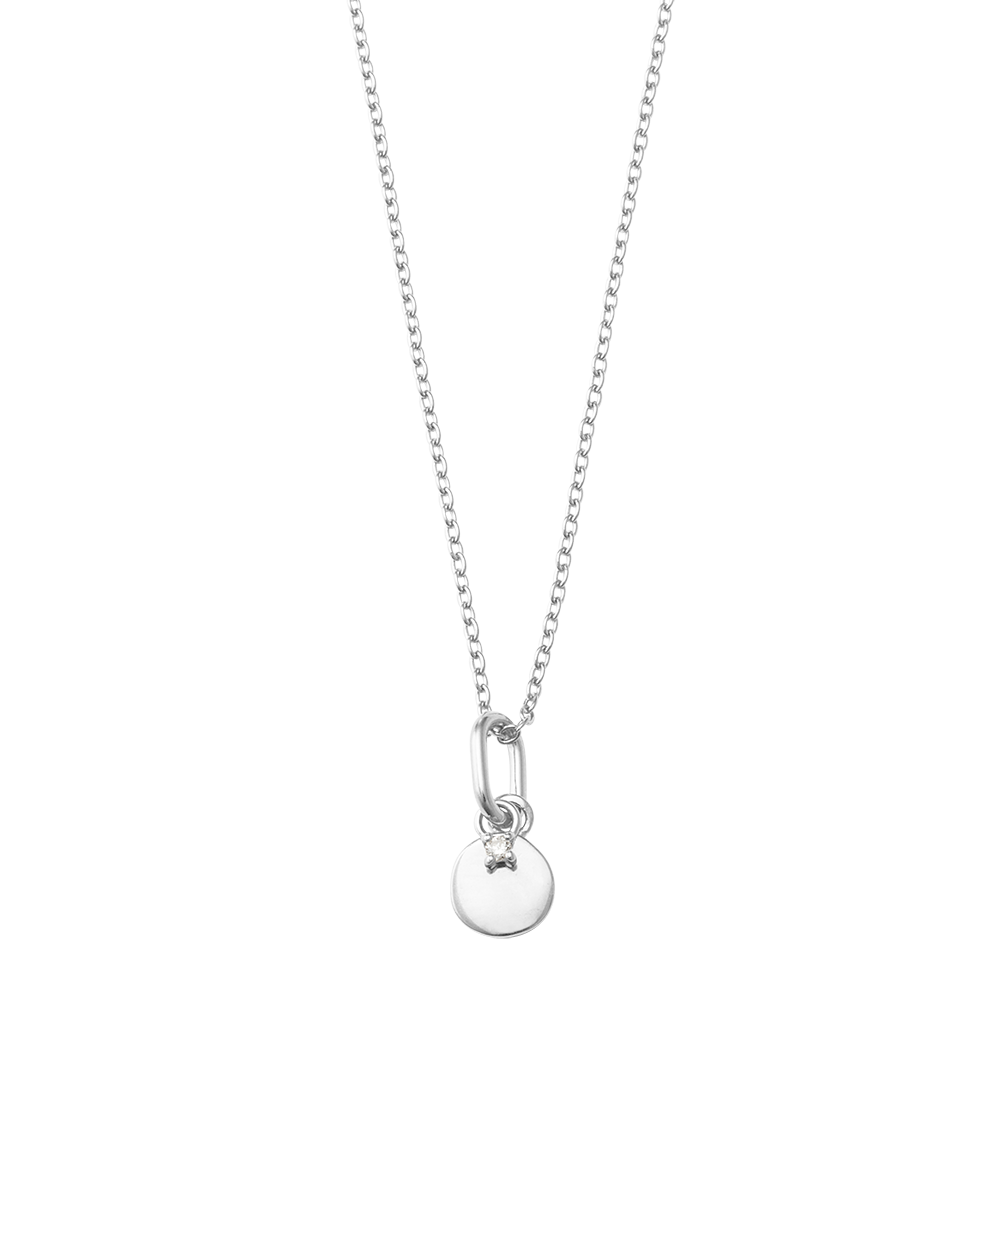 HONOUR NECKLACE (STERLING SILVER)